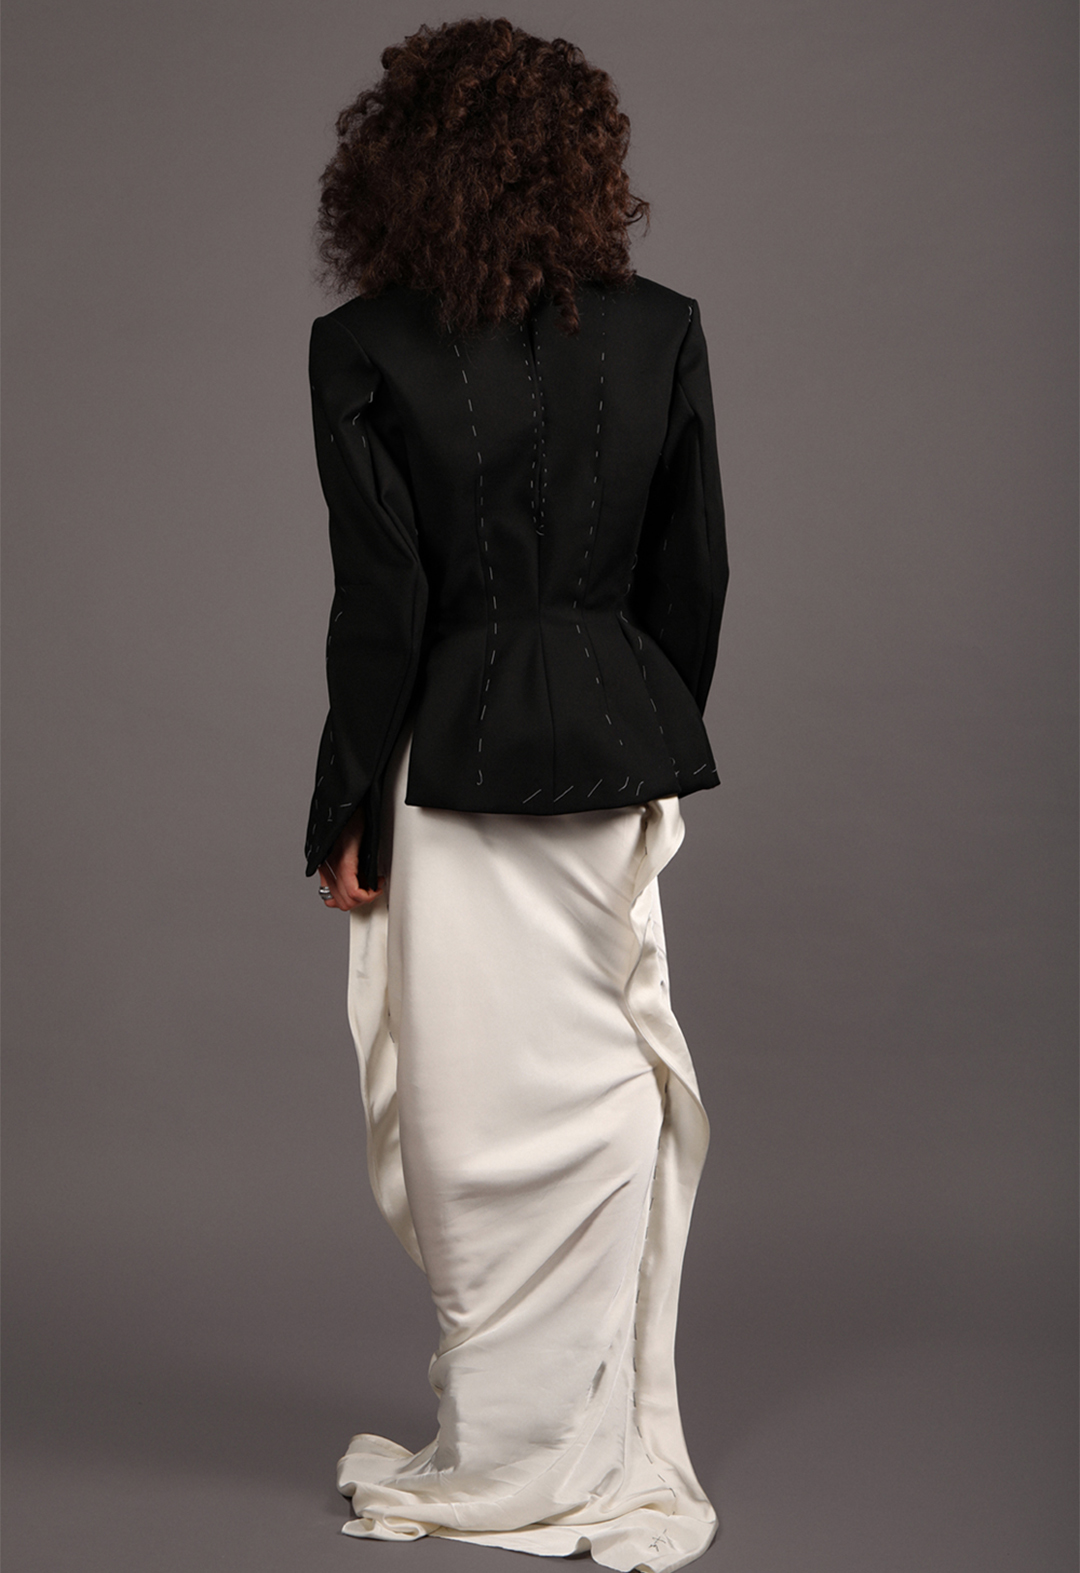 Model wearing a black tailored jacket with basting details, paired with a silky bias-cut ivory skirt with basting details, viewed from a back perspective.